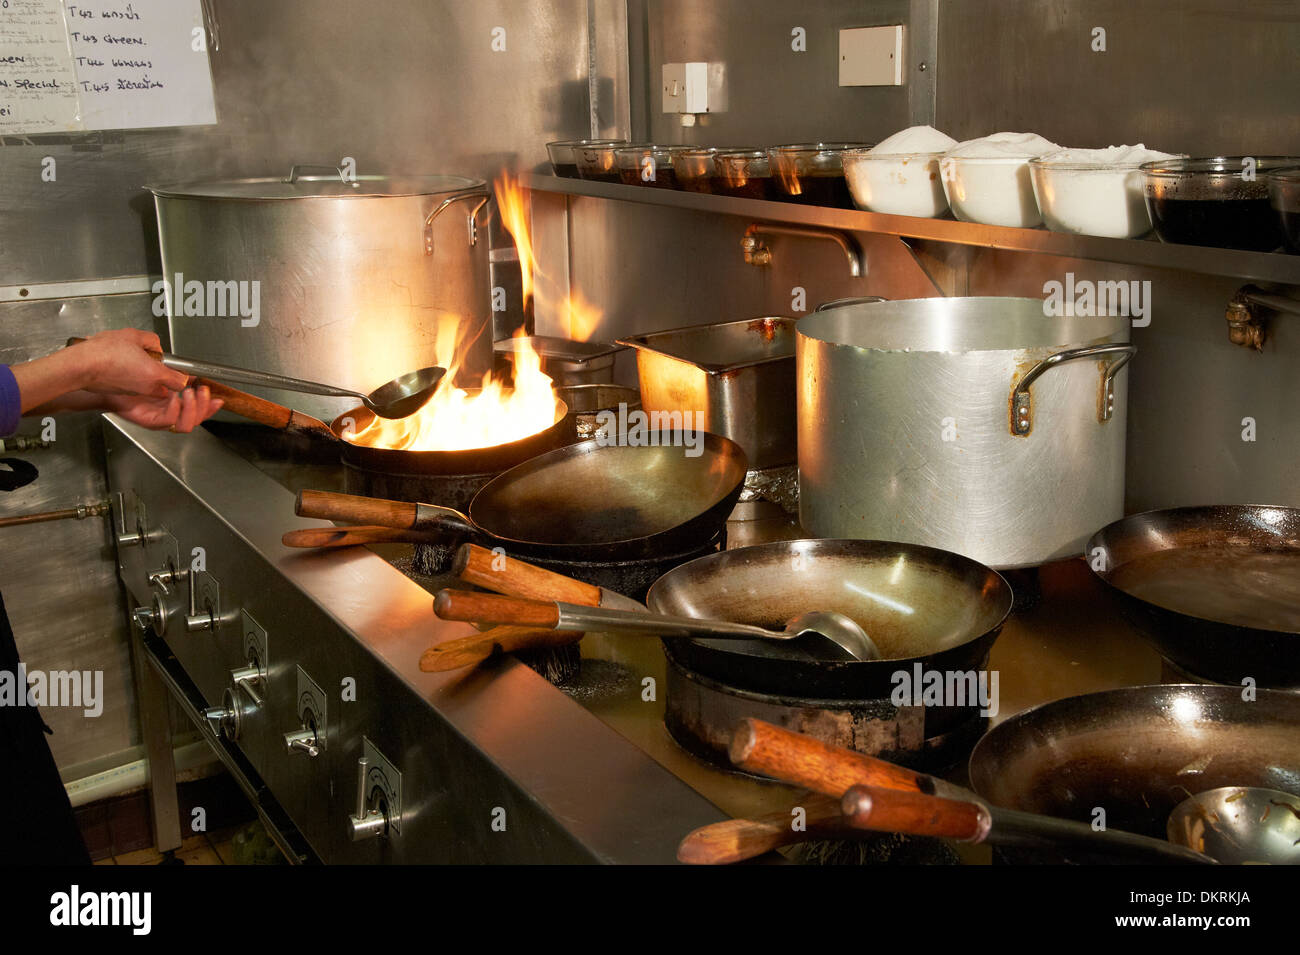 Chinese cooking with woks Stock Photo